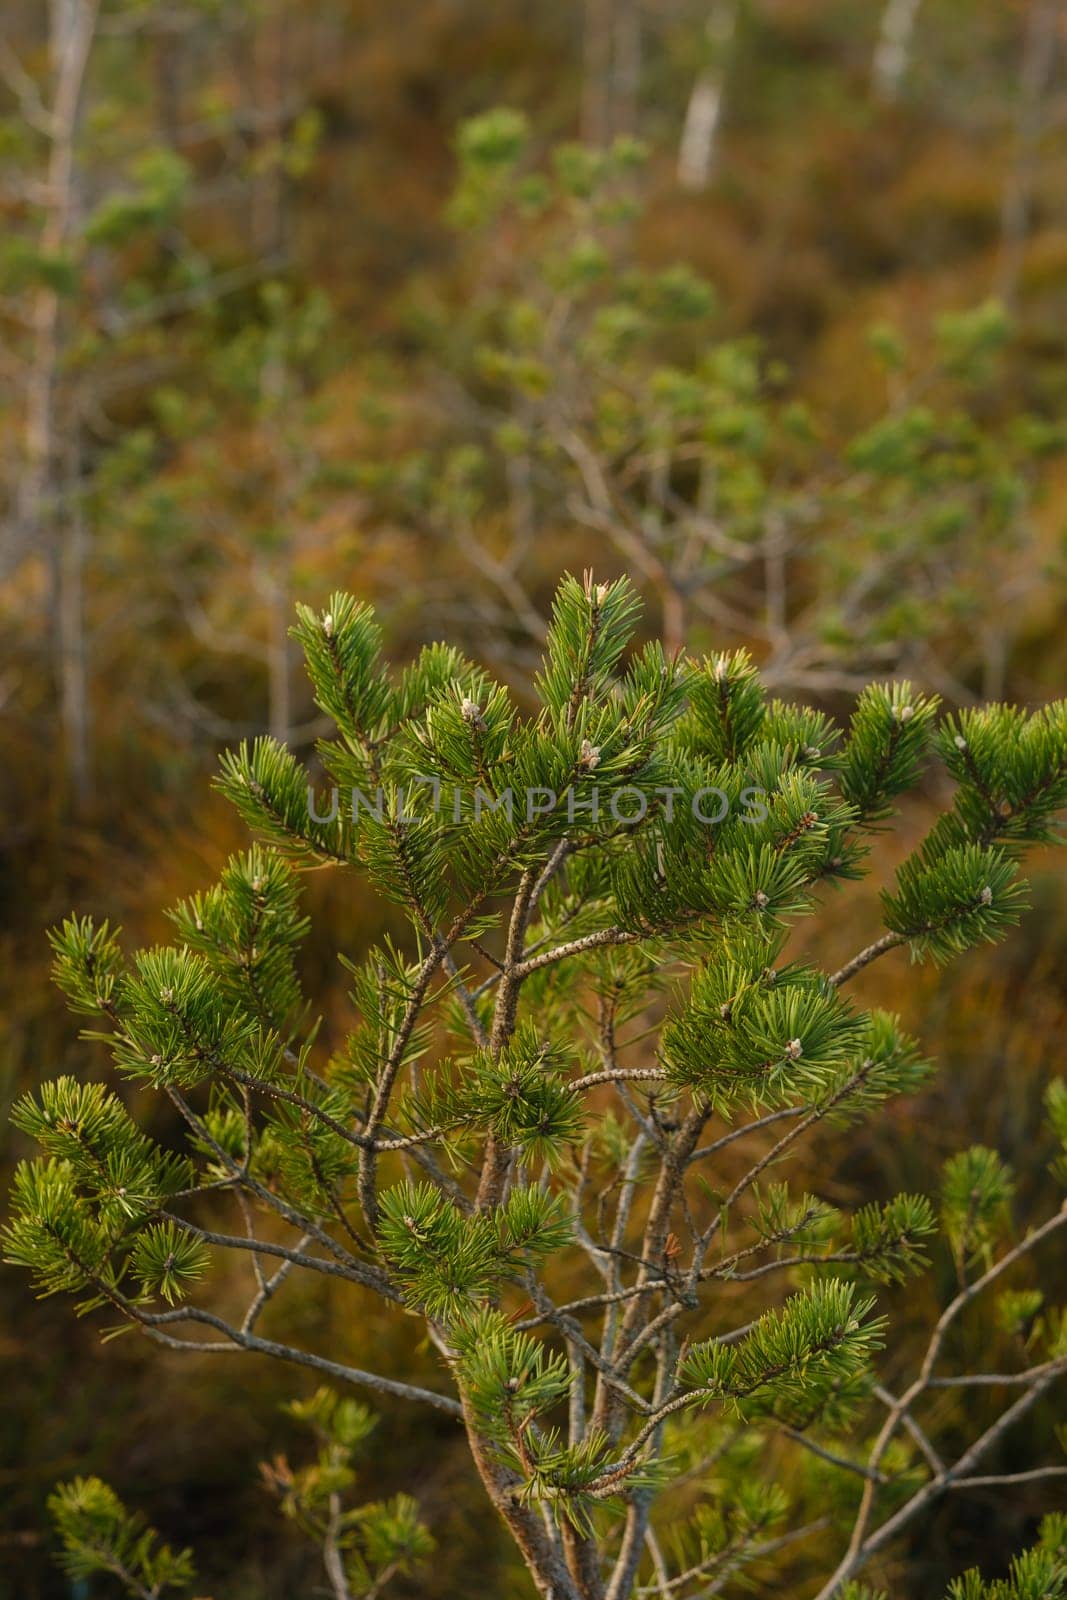 Spruce branches in the swamp in the Yelninsky Nature Reserve, Belarus, Ecosystems environmental problems climate change.